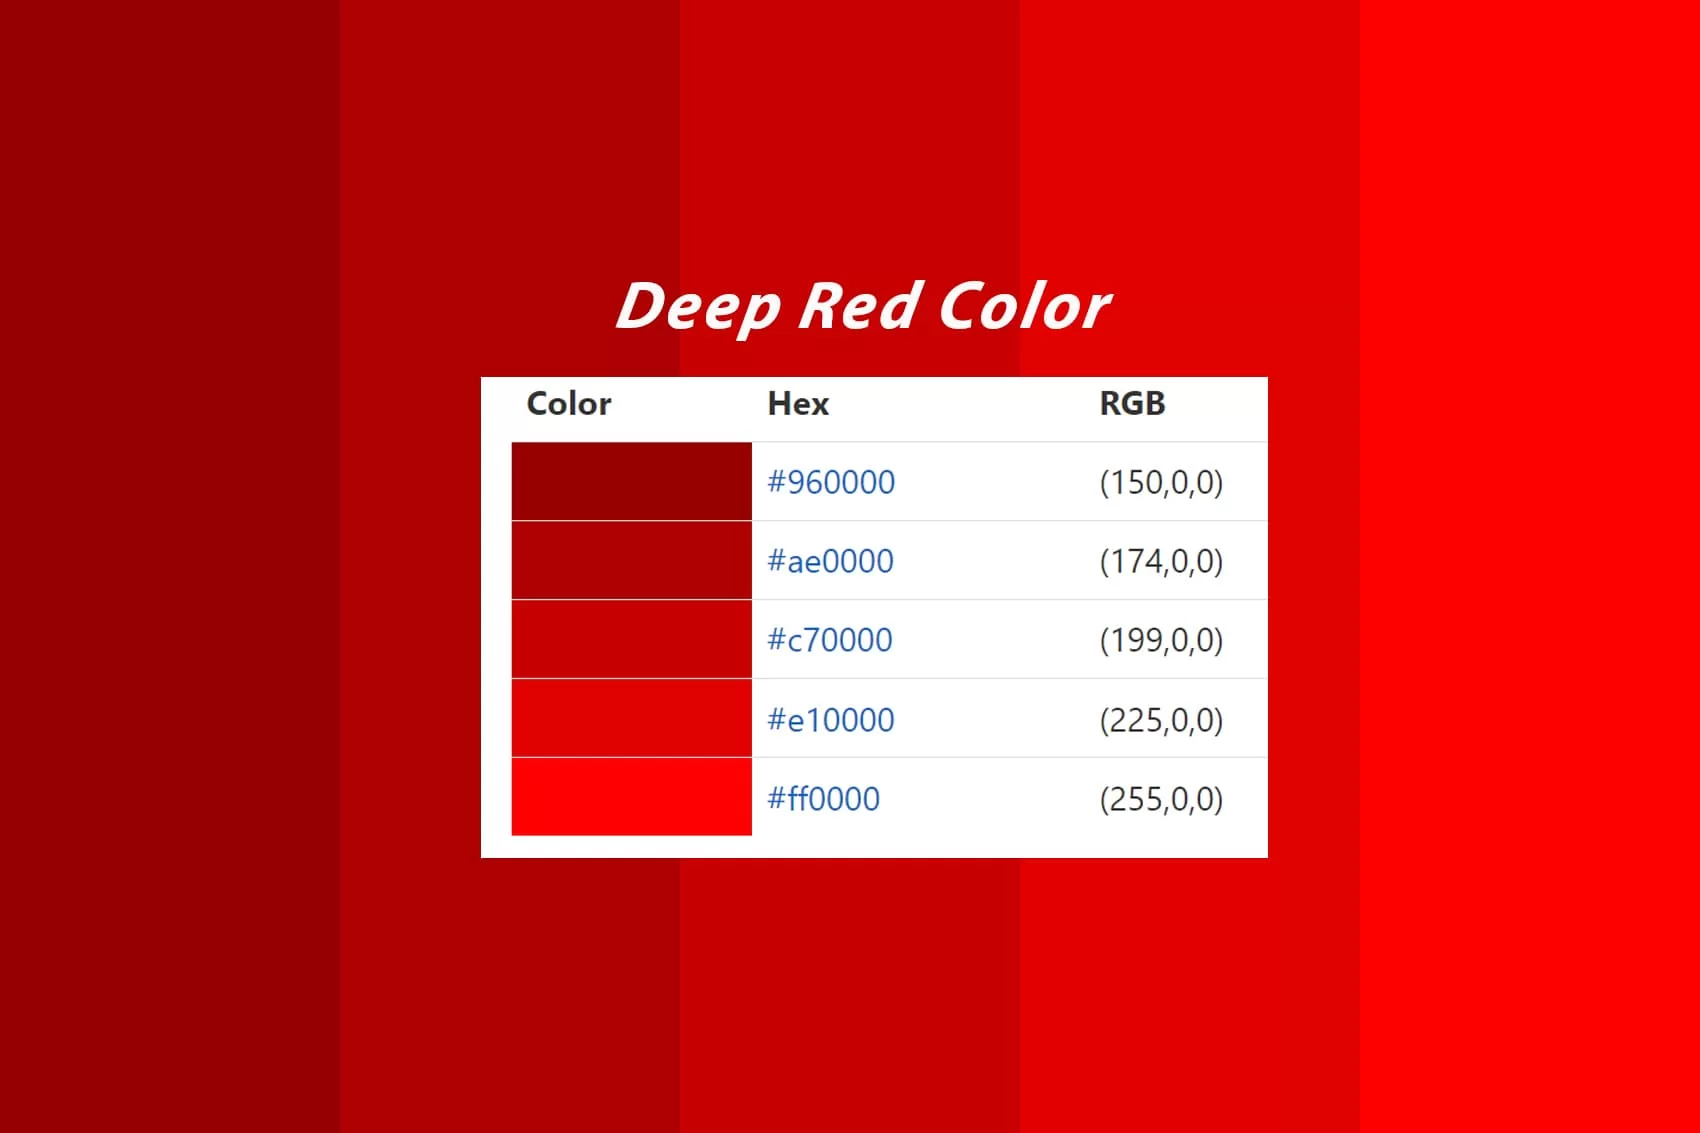 Deep Red Color